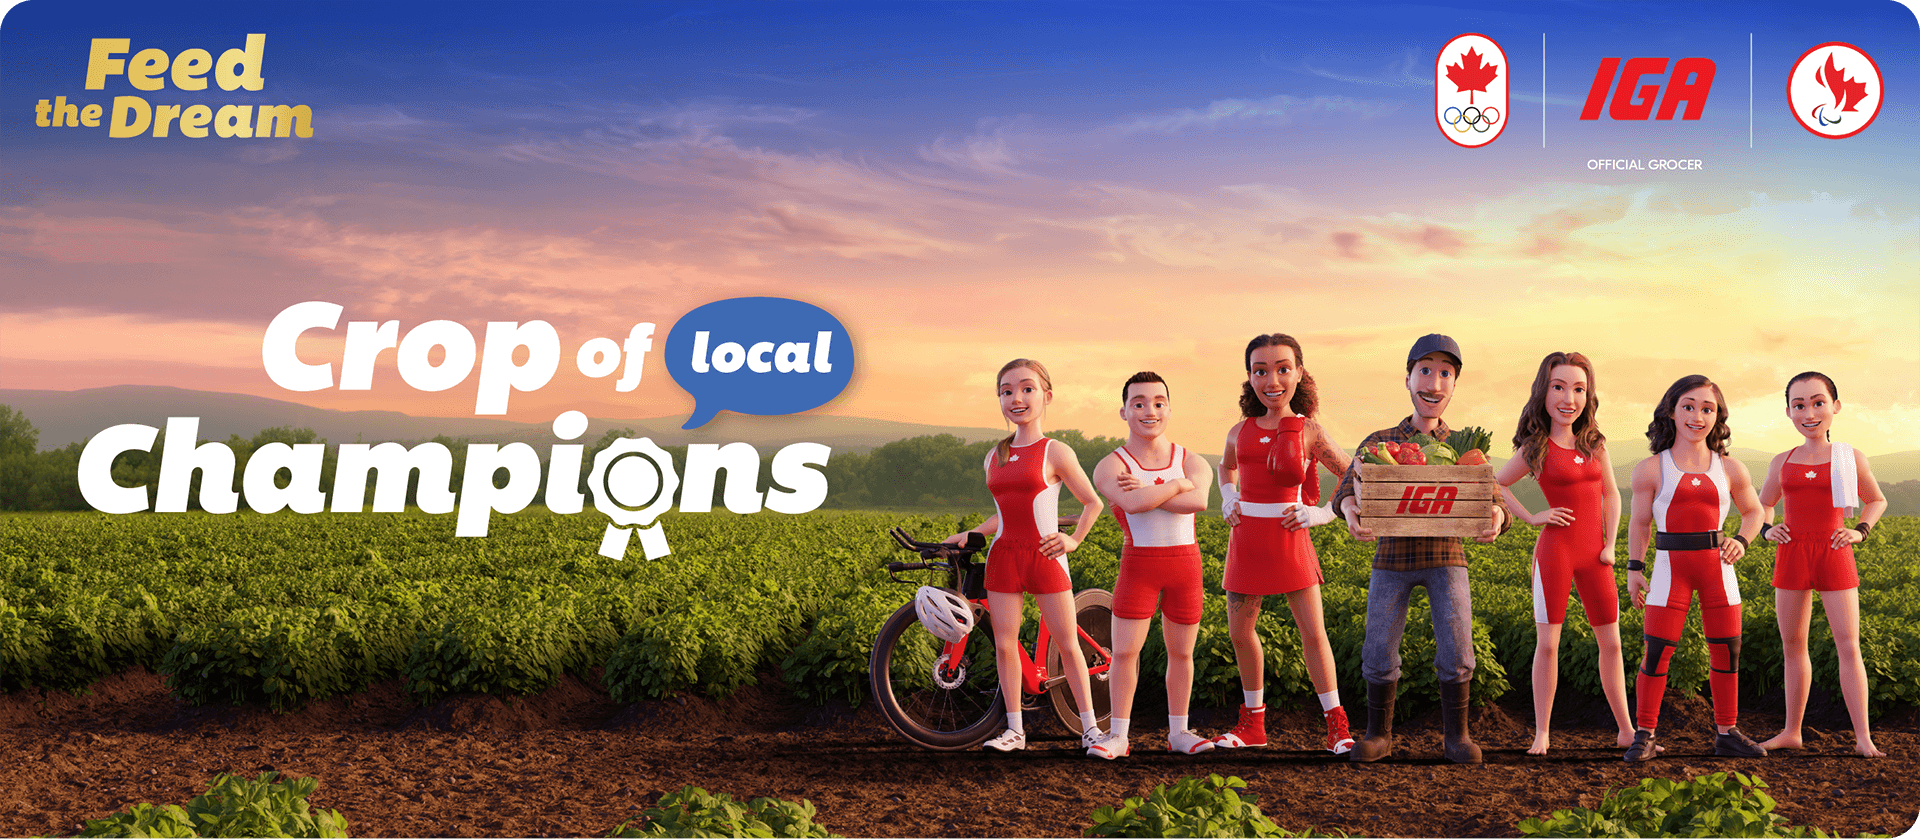 CGI image of six athletes, five women and one man, dressed in Canadian colours, standing in a farmer’s field at sunset. In the center, a farmer holds a wooden crate stamped with the IGA logo, filled with fresh vegetables. The slogan “A crop of champions” is overlaid. The logos of the Canadian Olympic and Paralympic Committees are displayed, affirming IGA as the official grocer of Quebec Olympic and Paralympic athletes.